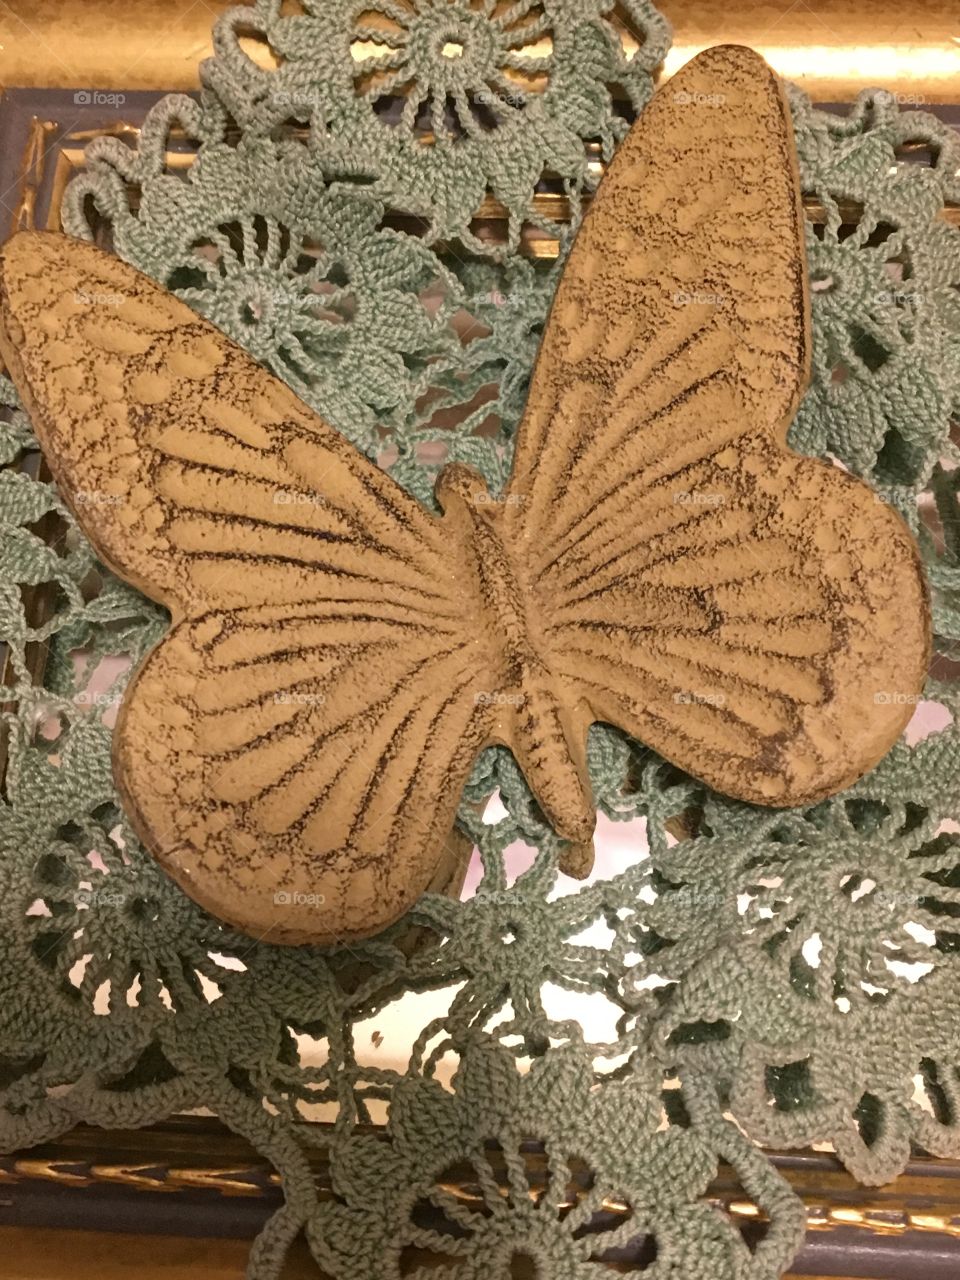 Crocheted Doily and iron cast butterfly 